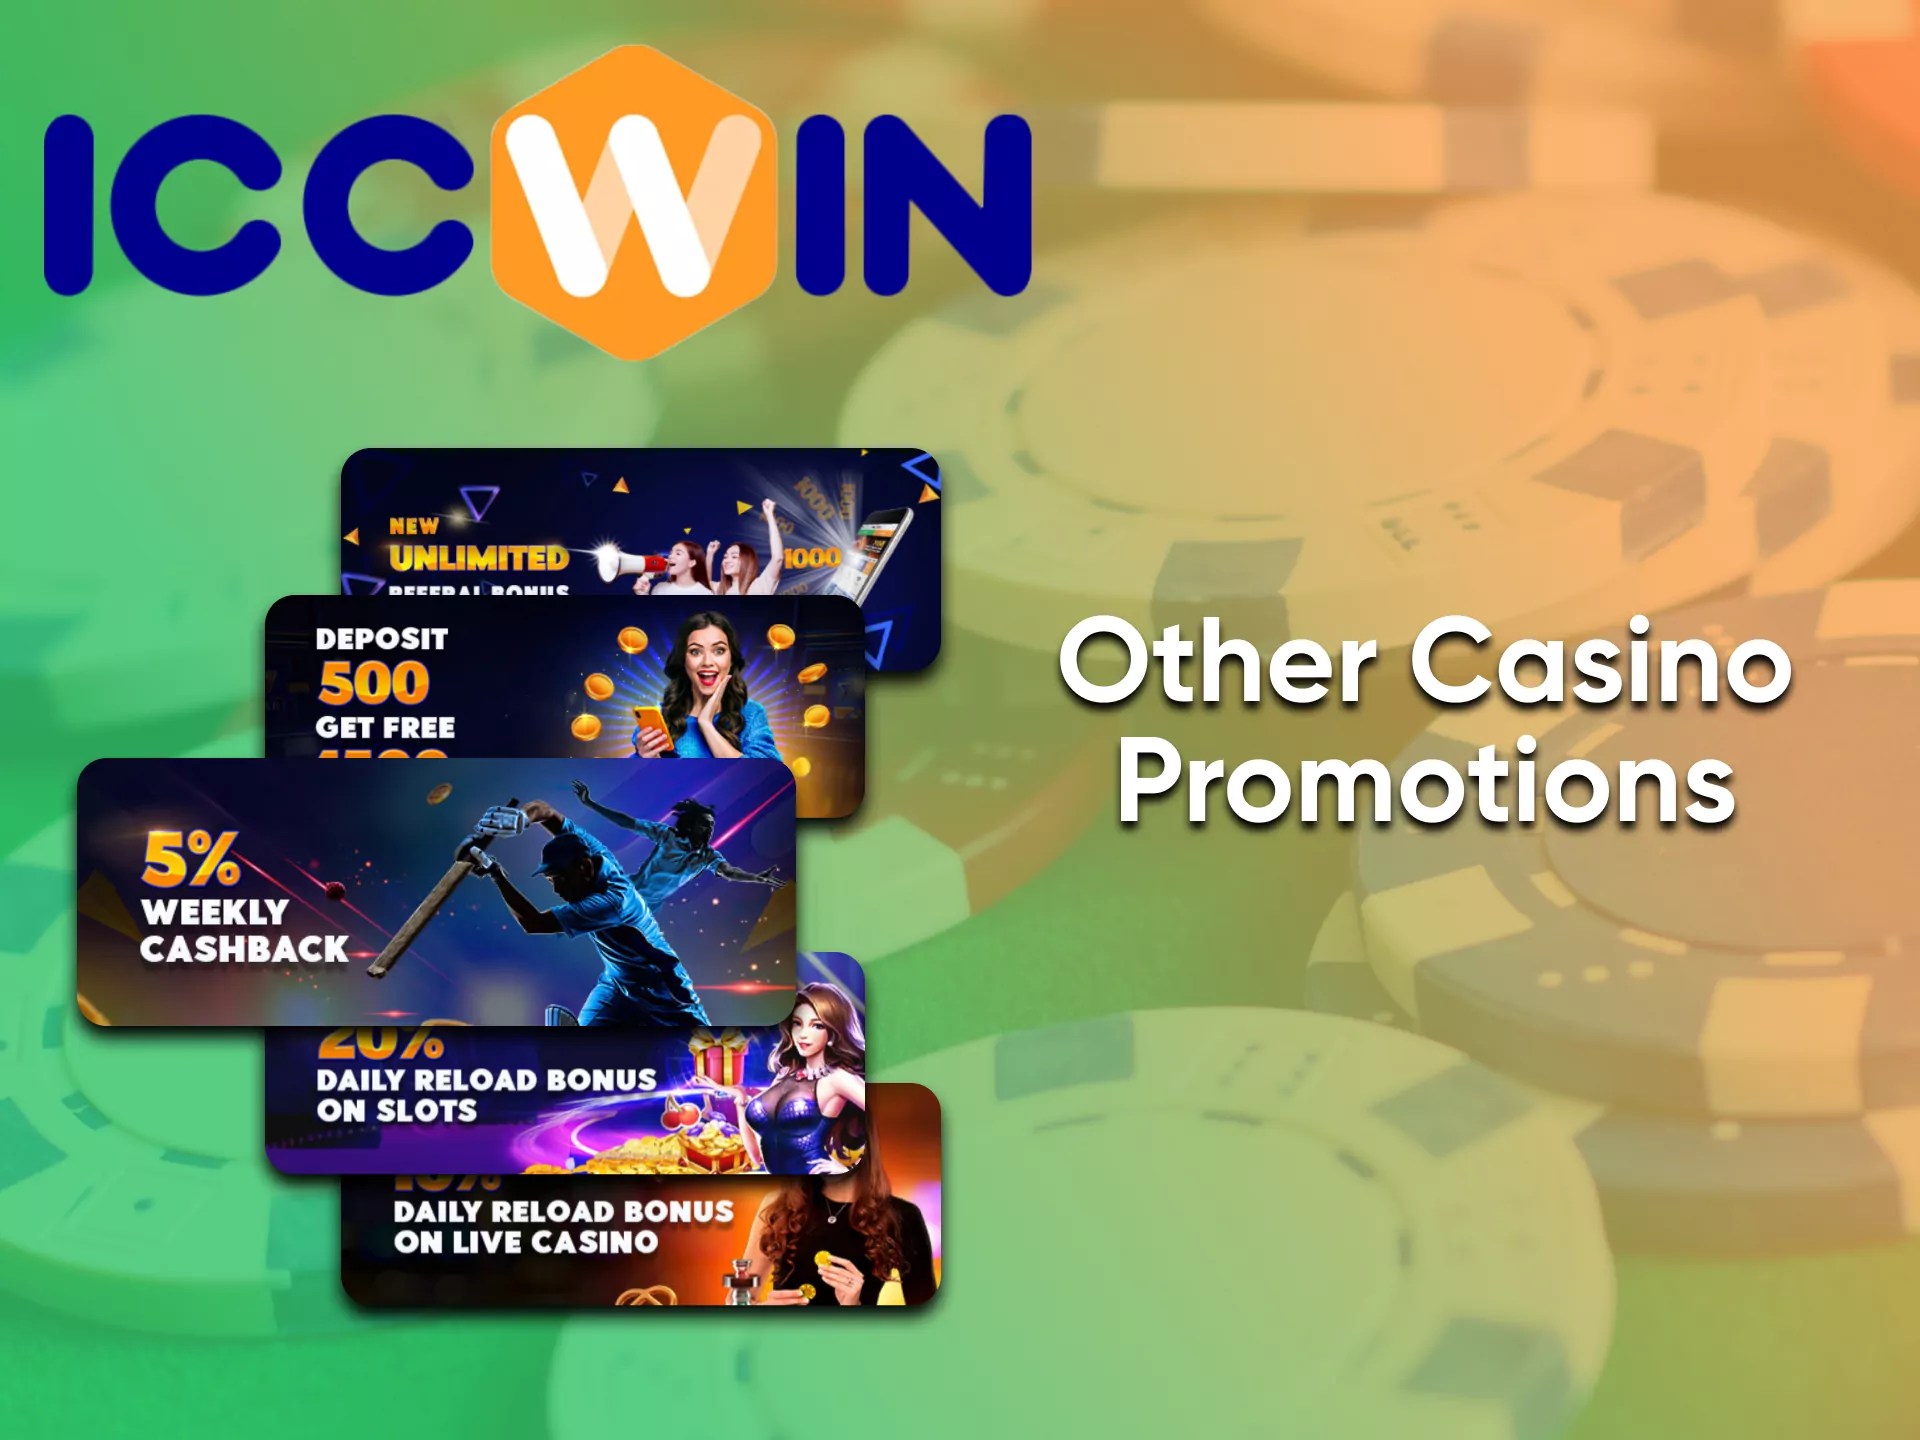 Play at the casino to receive a bonus from ICCWin.